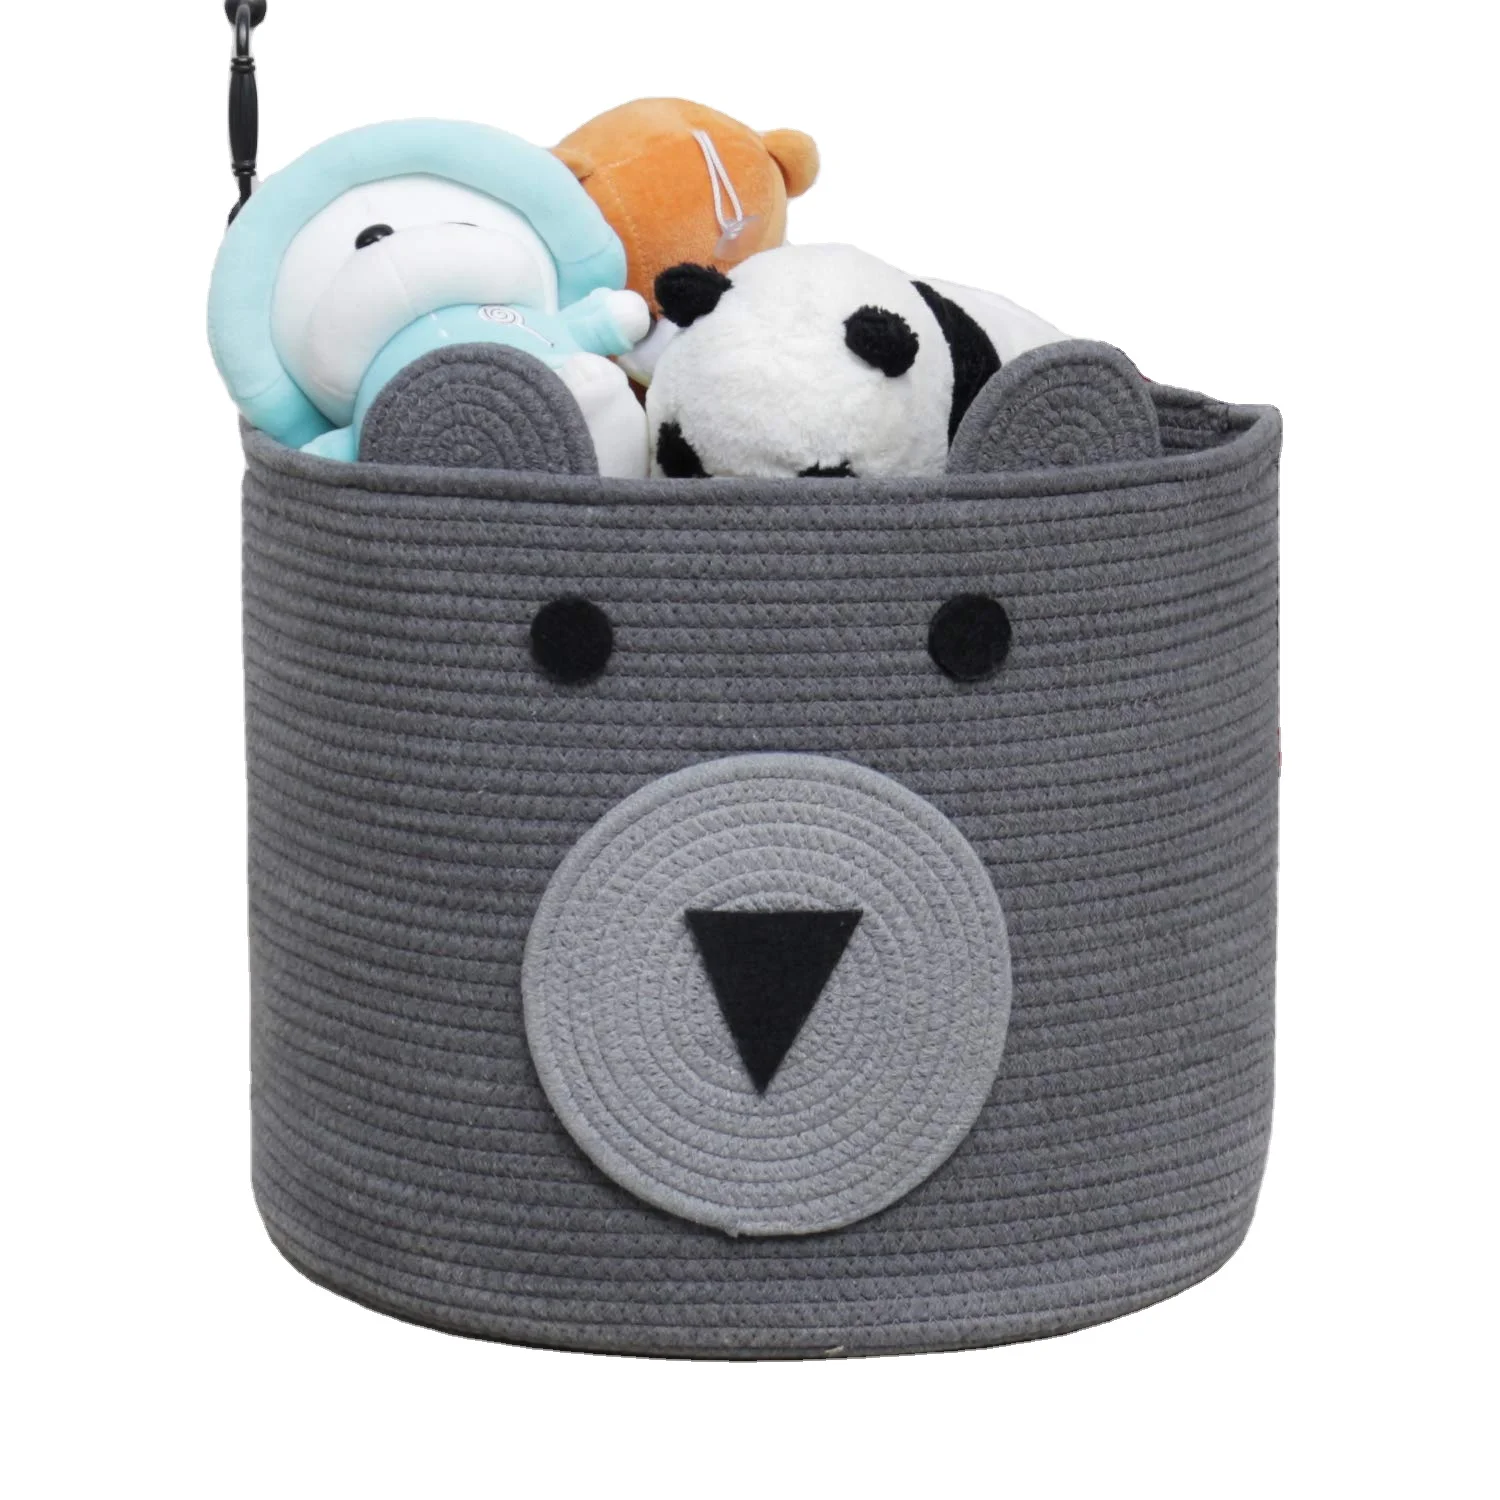 

Bear Cotton Rope Basket Toy Storage Bin Woven Laundry Hamper Cute Storage Basket for Kids Toys Cloths in Bedroom, White